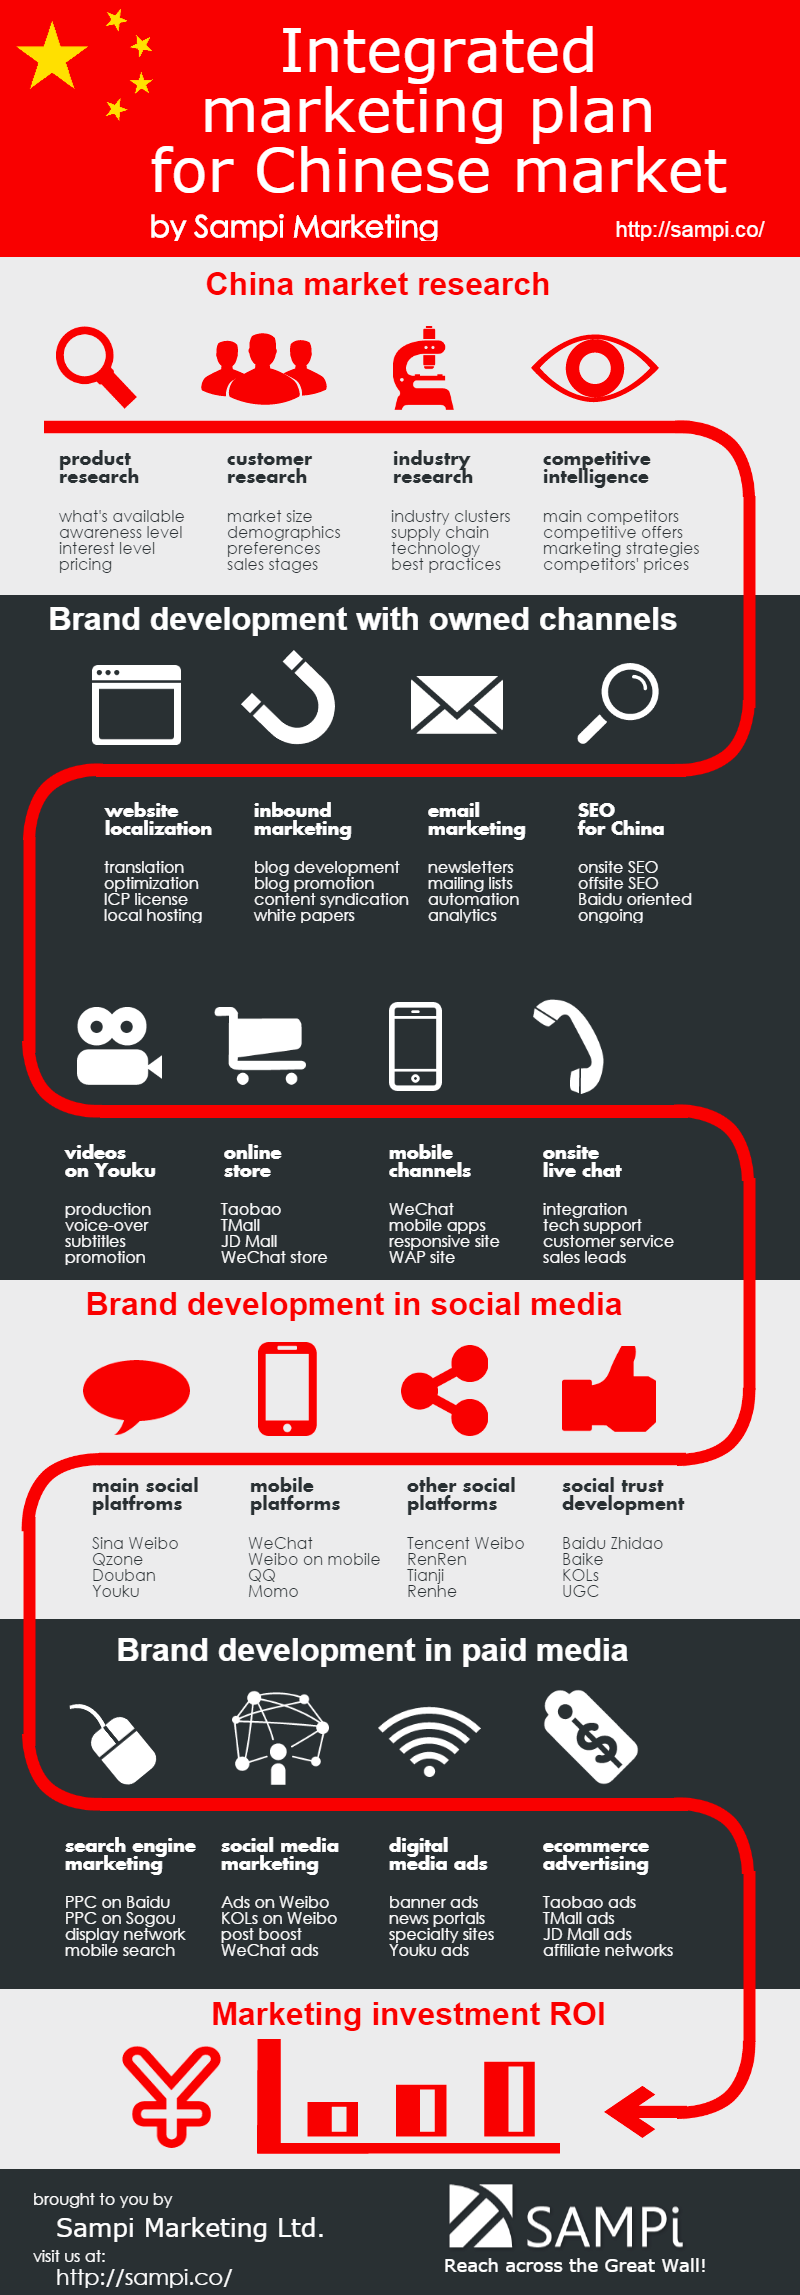 China integrated marketing plan infographic